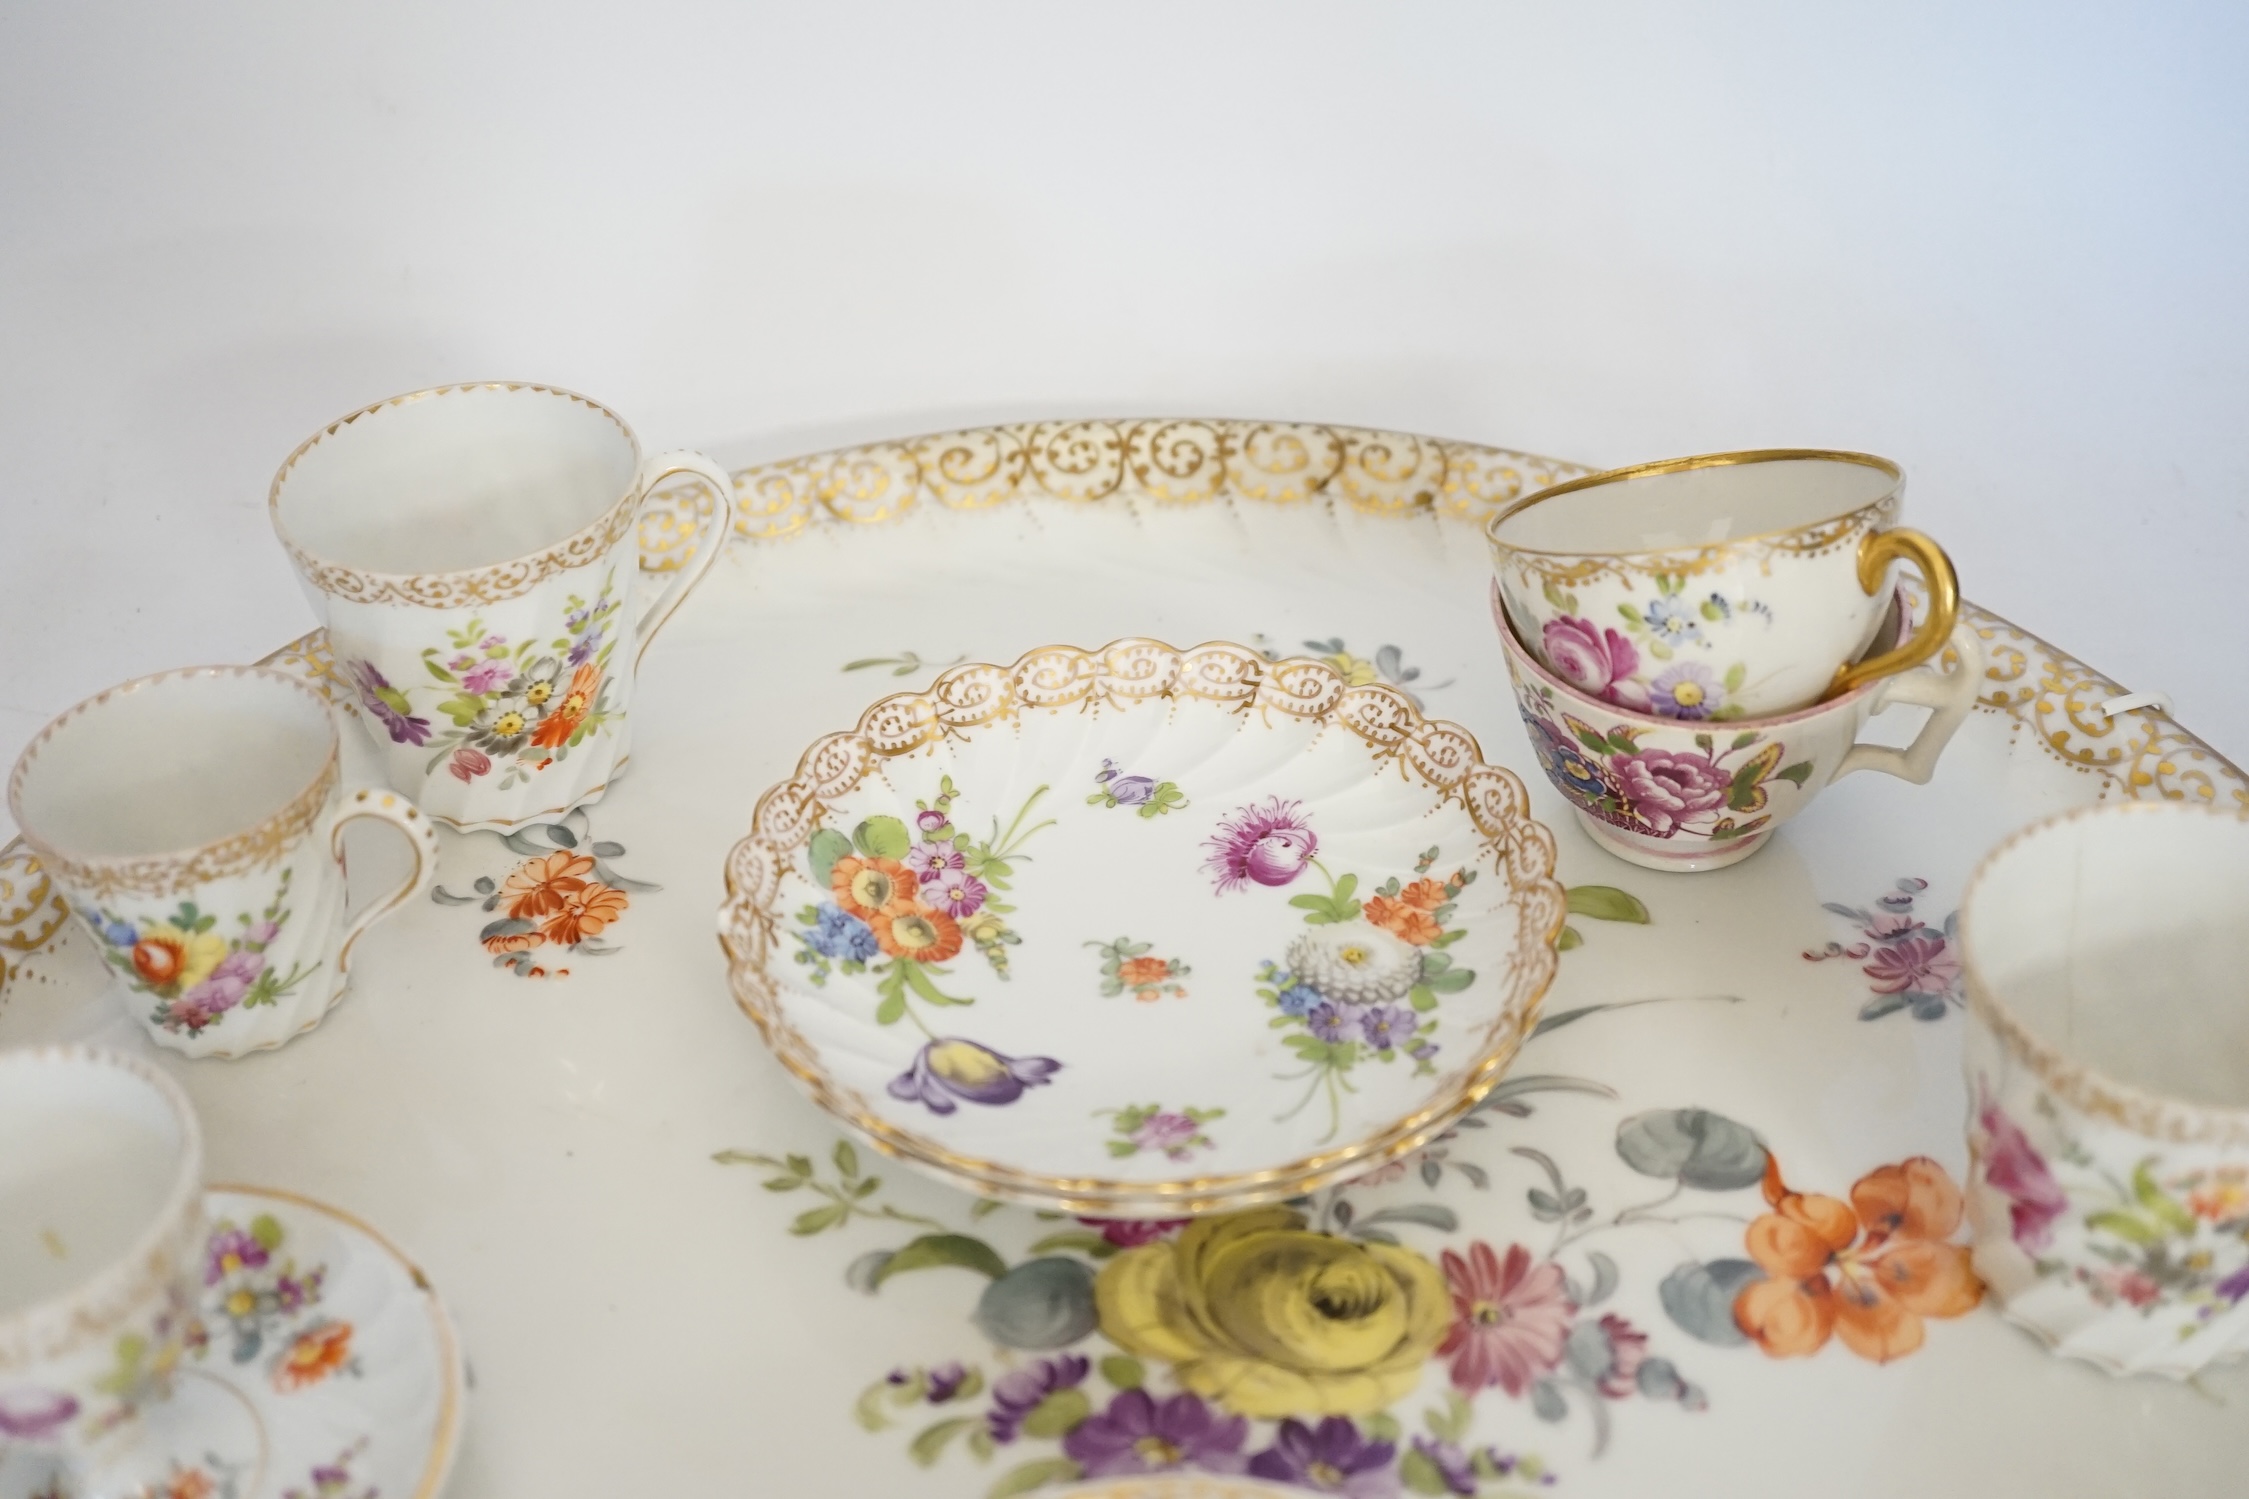 A Dresden floral painted tray and other coffee wares, 39cm diameter. Condition - poor to fair